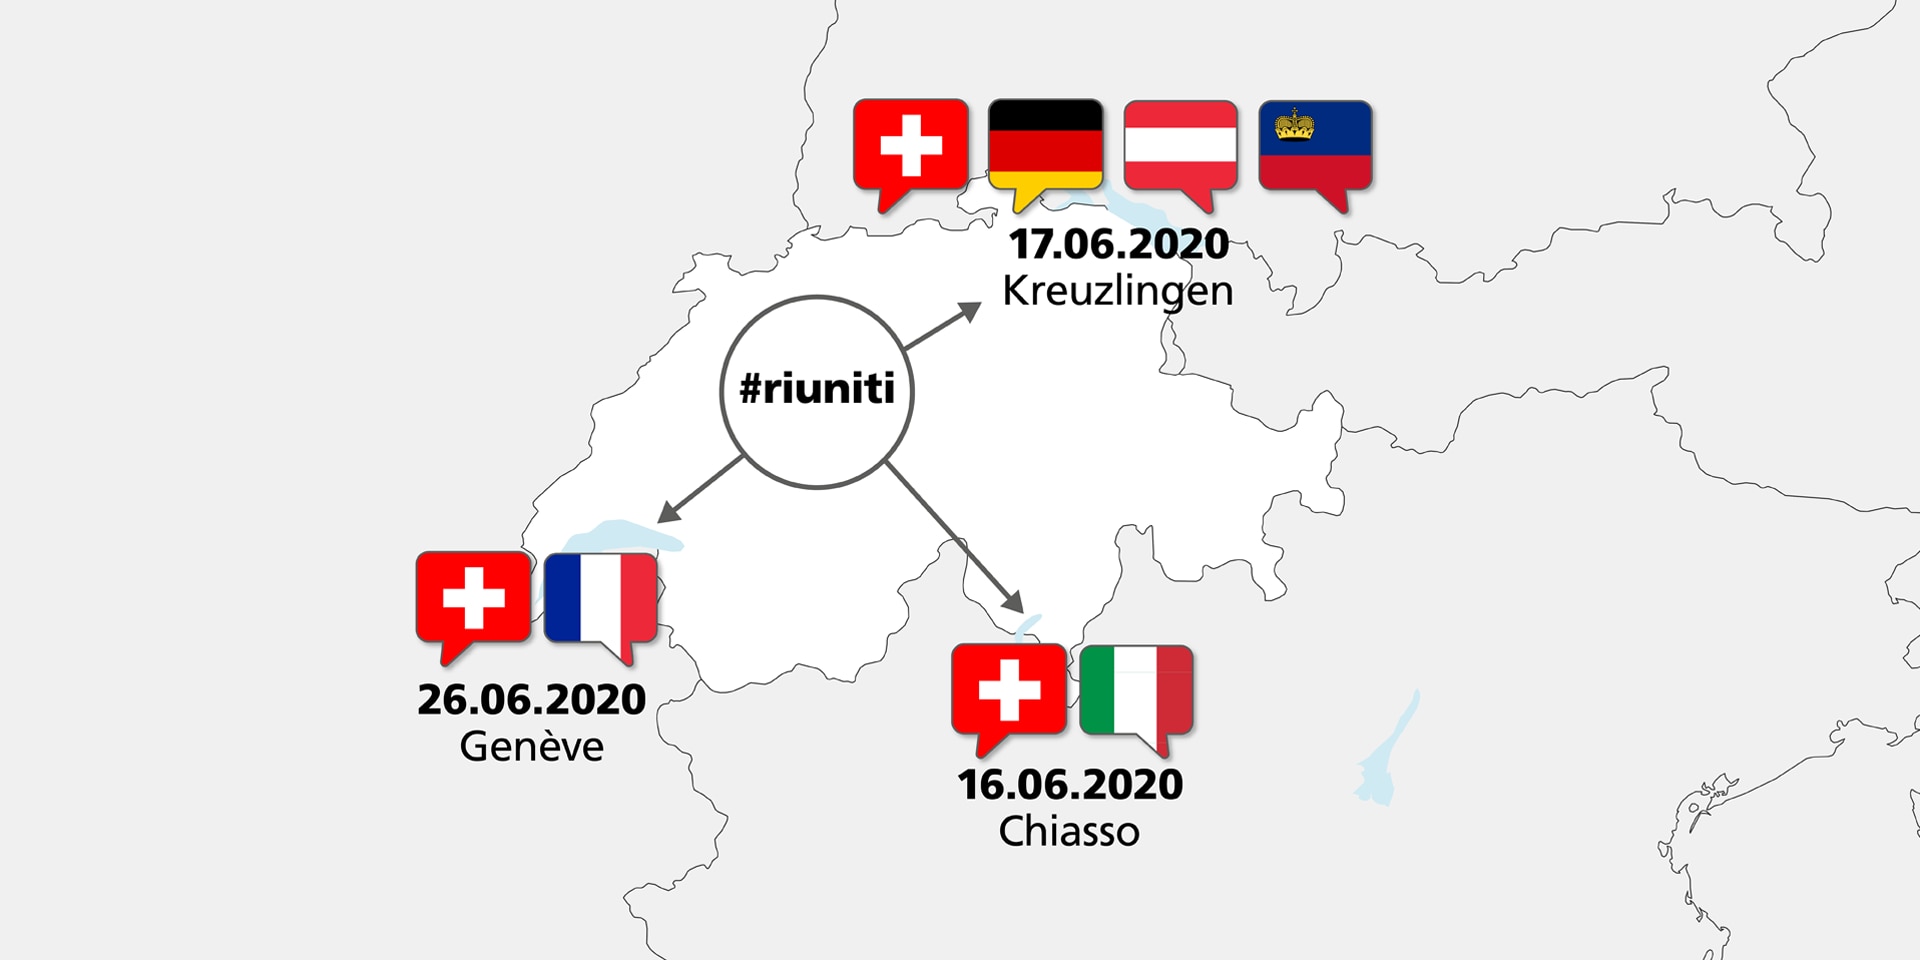 Map of Switzerland showing which national representativesFederal Councillor Cassis will be meeting and where. In Chiasso he meets the Italian Foreign Minister. In Kreuzlingen he will meet representatives of Austria, Liechtenstein and Germany, and in Geneva, a representative of France.